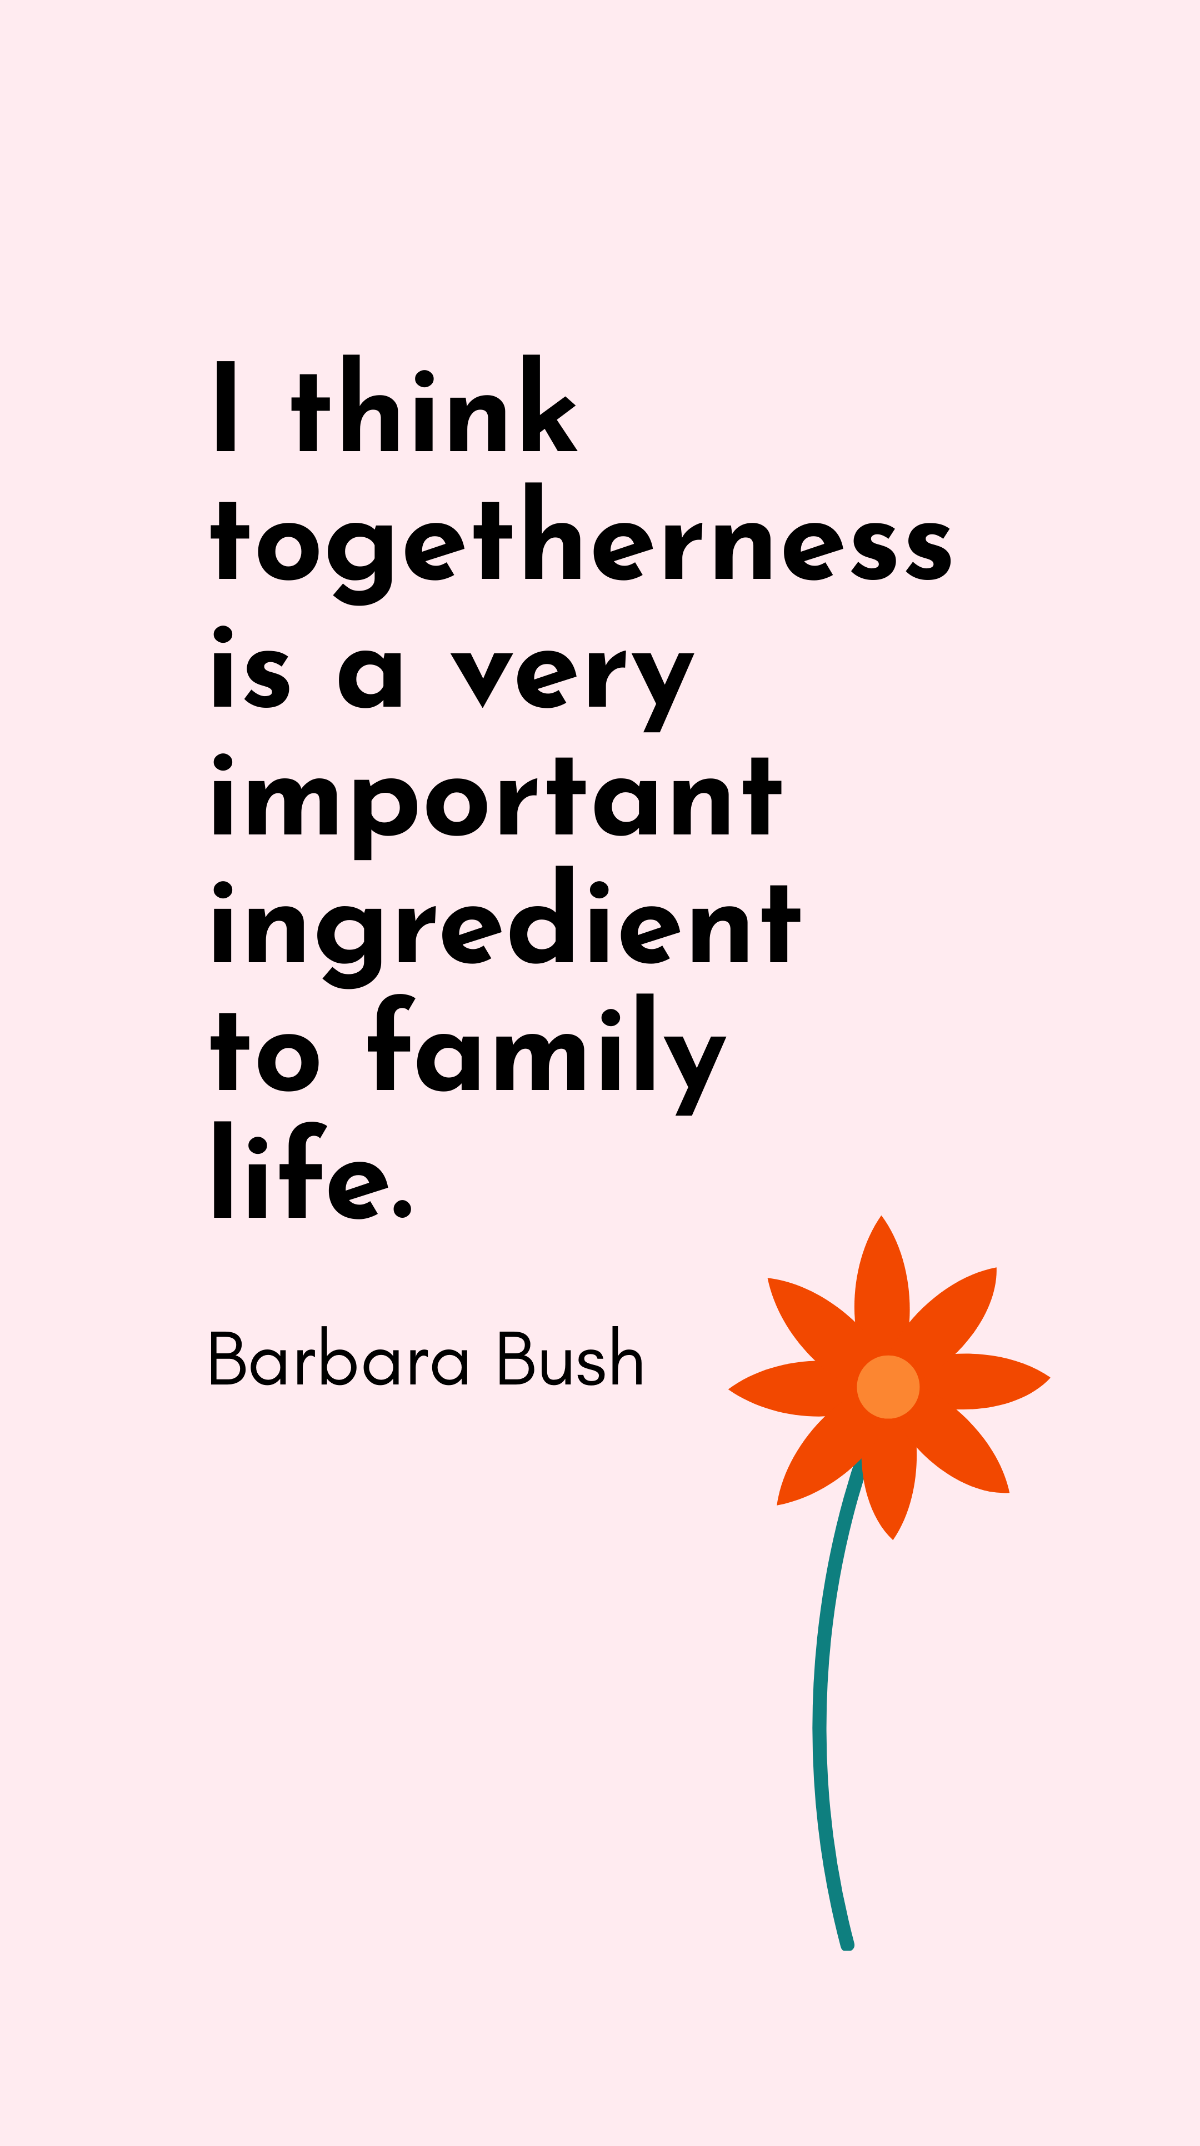 Barbara Bush - I think togetherness is a very important ingredient to family life. Template